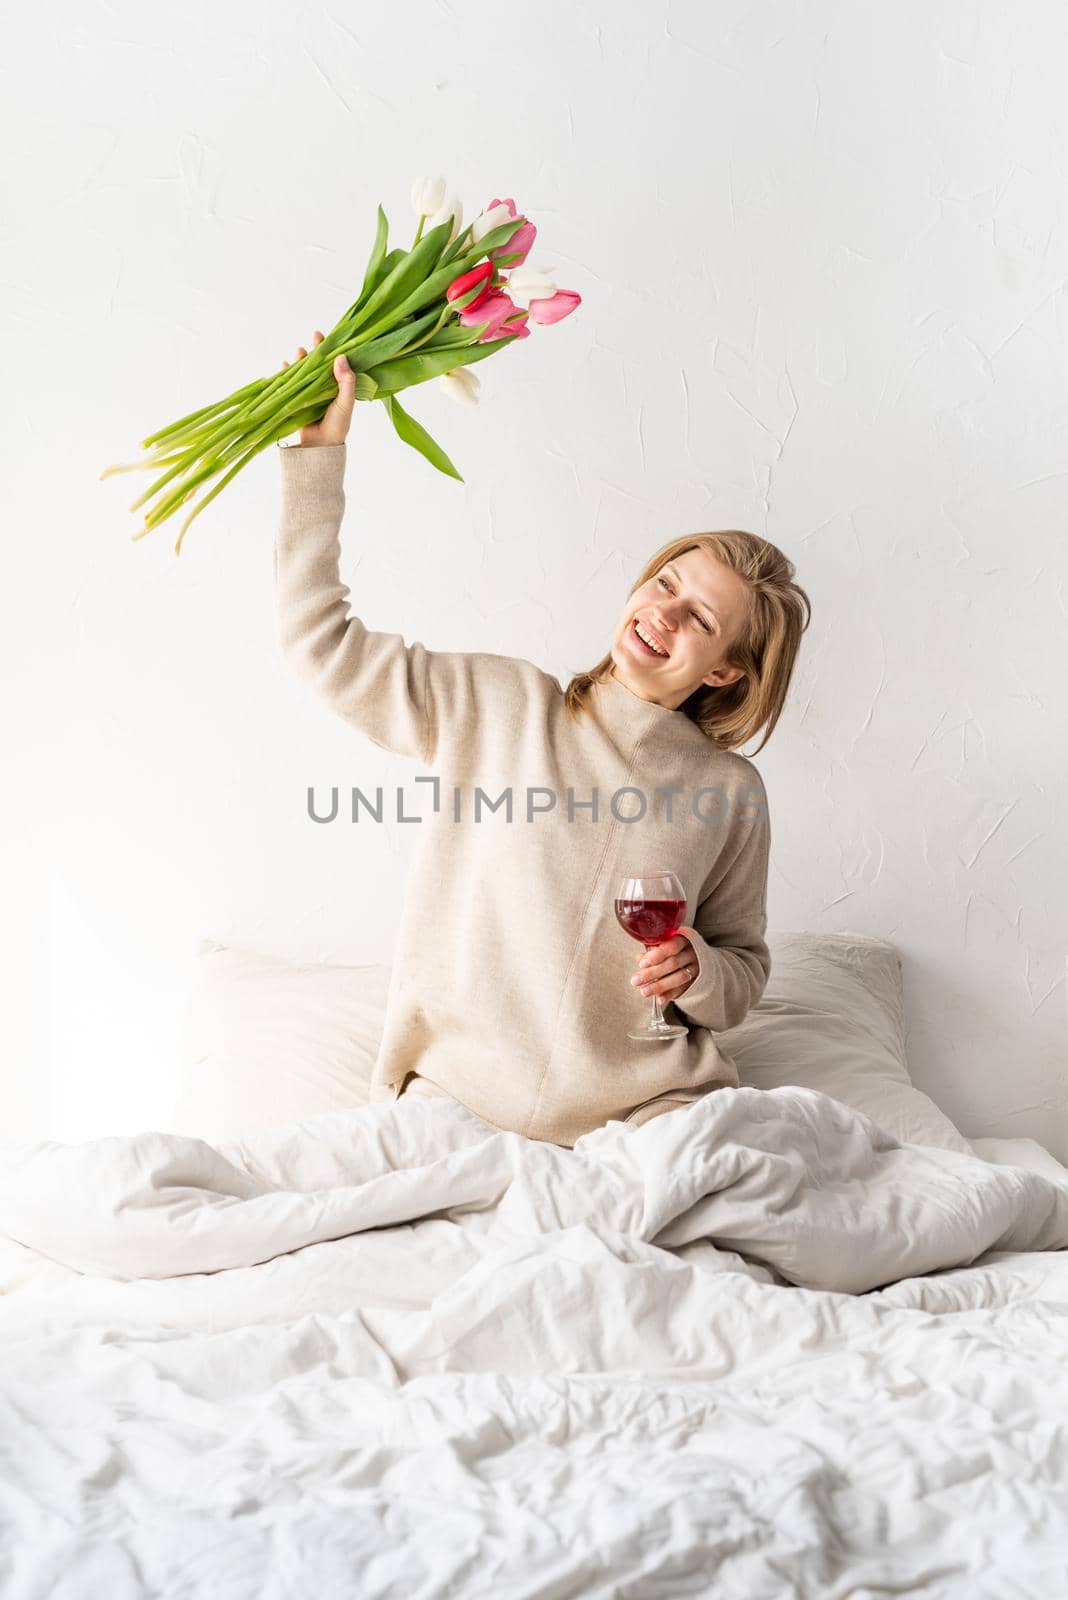 Happy woman sitting on the bed wearing pajamas holding glass of wine and tulip flowers bouquet by Desperada